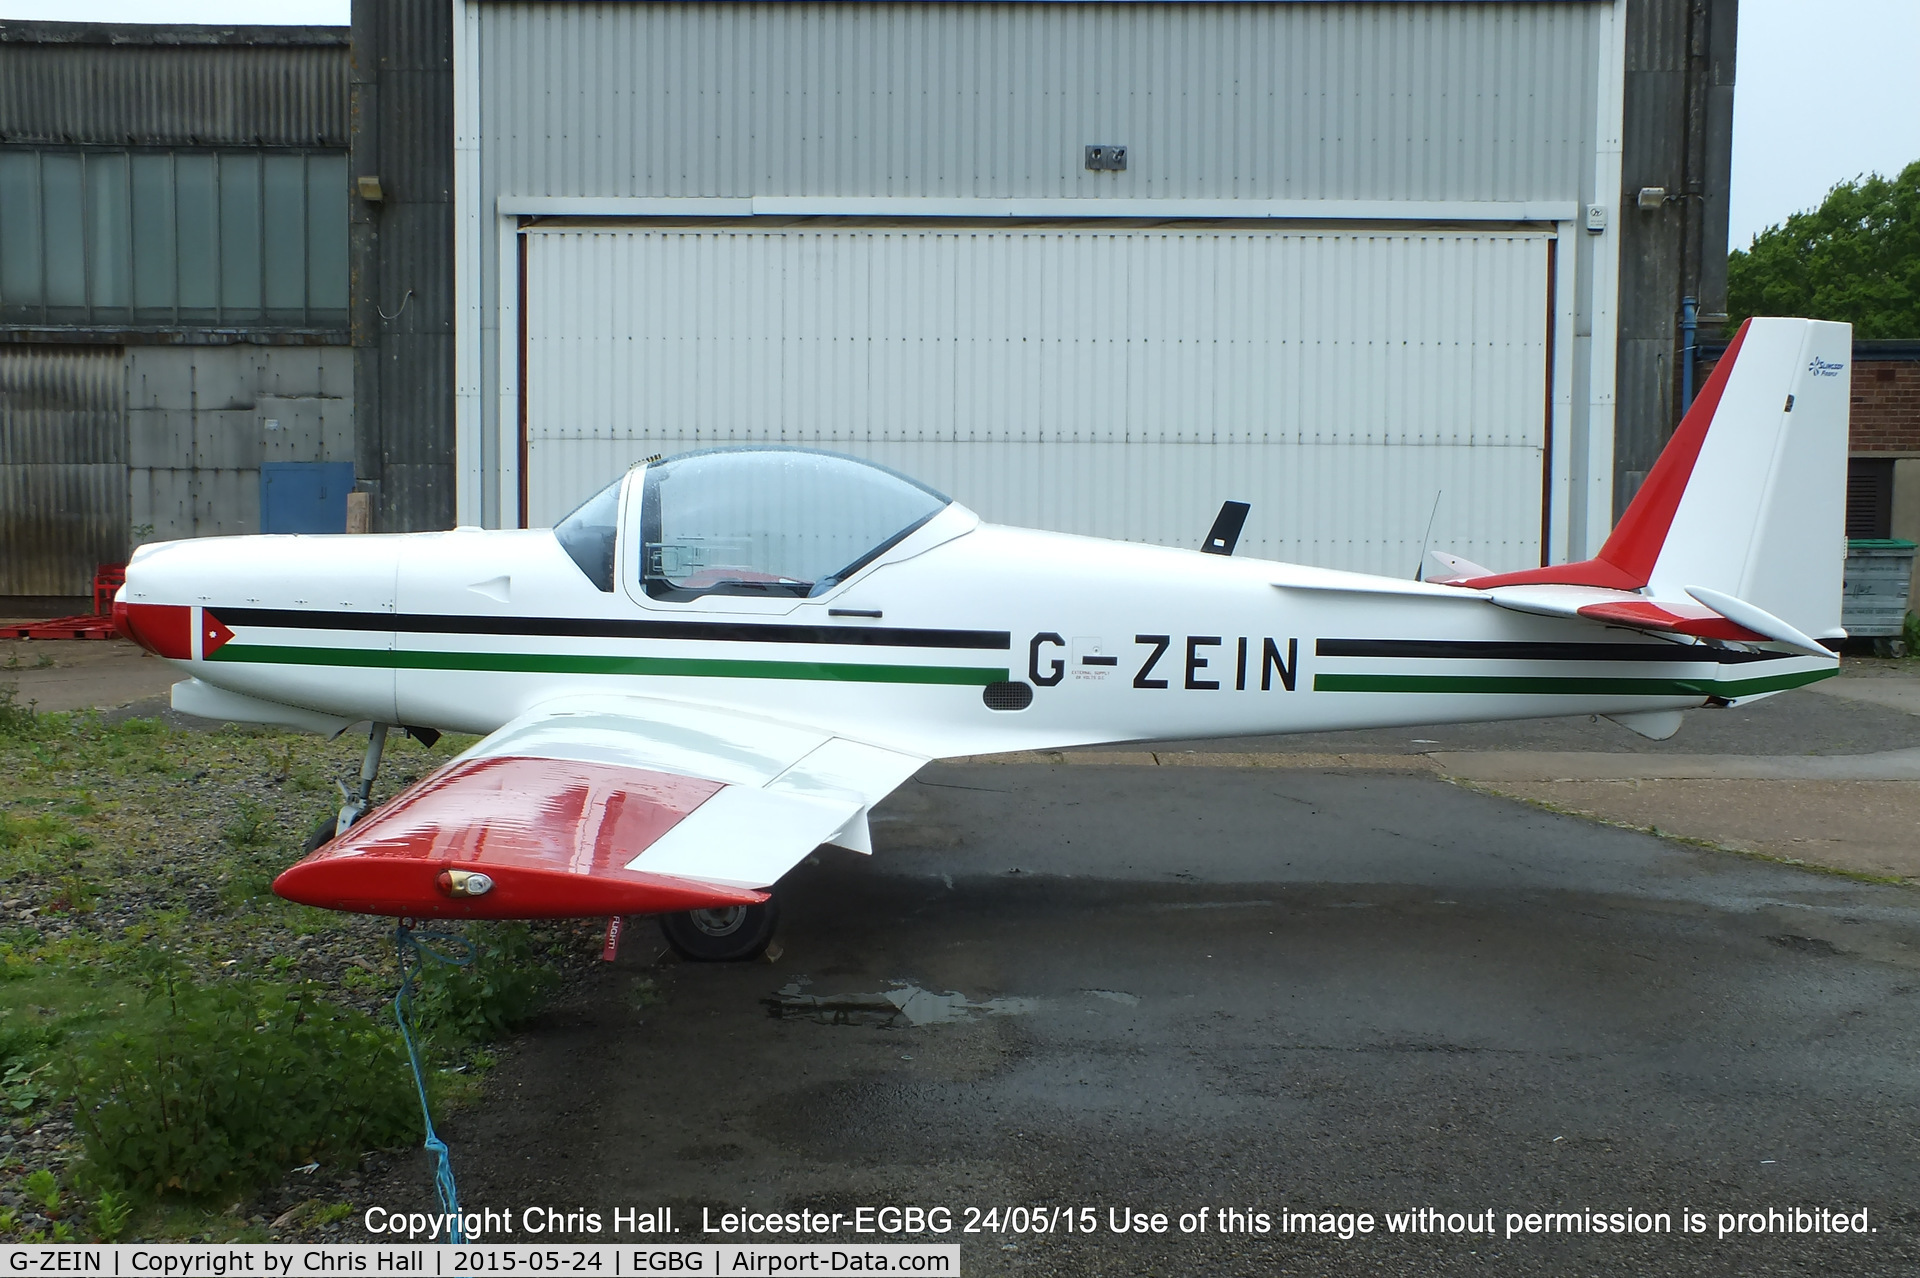 G-ZEIN, 1995 Slingsby T-67M-260 Firefly C/N 2234, parked at Leicester